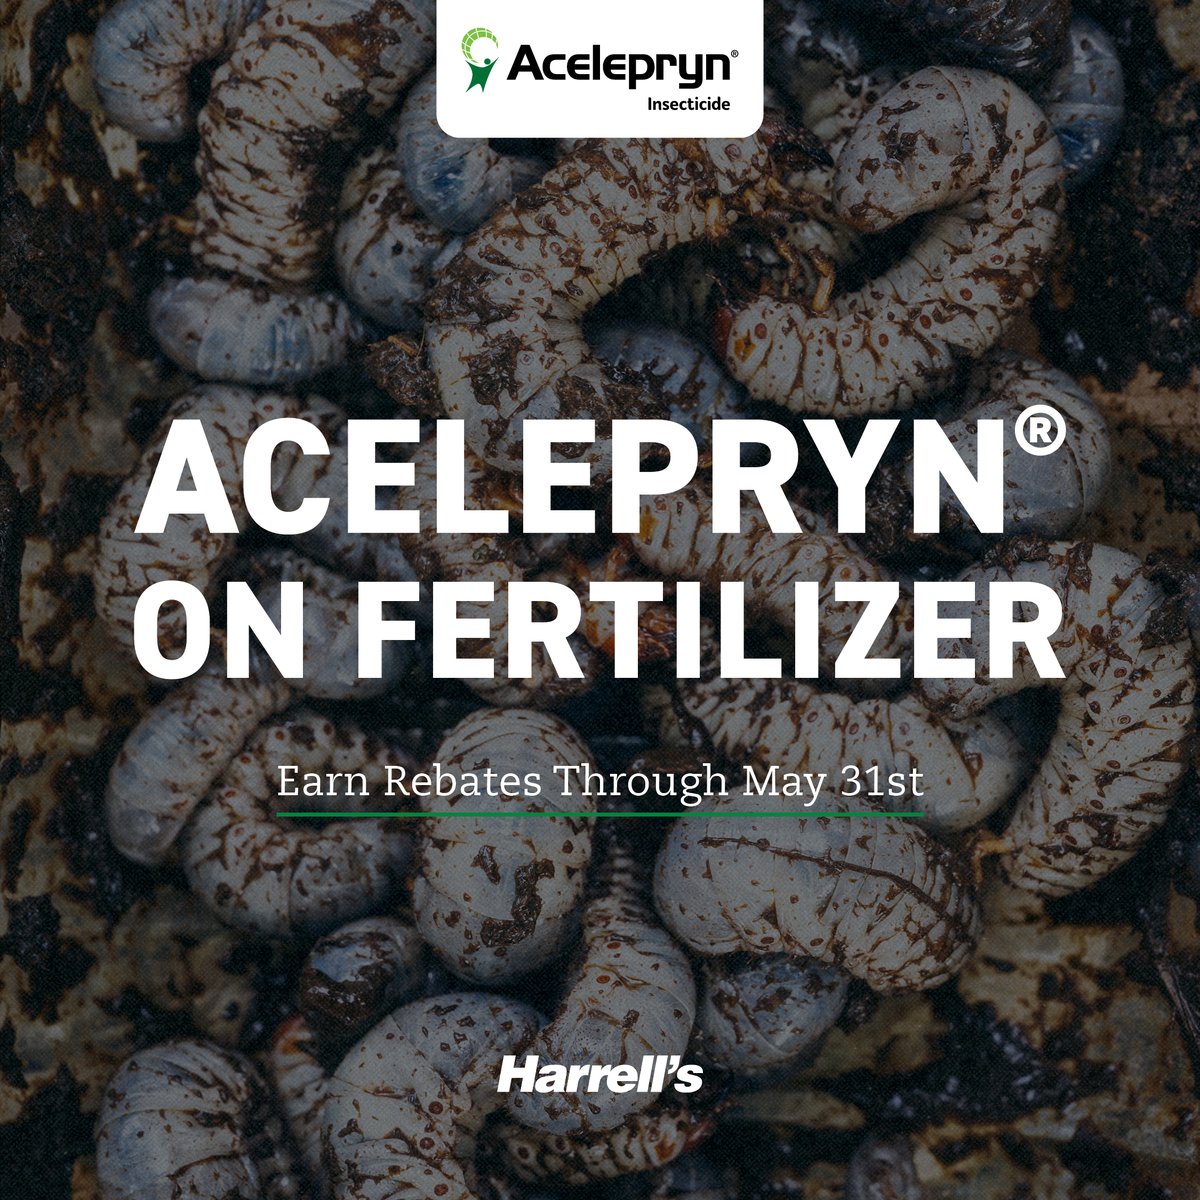 Earning additional rebates is another of the many benefits of purchasing POLYON® fertilizer sparged with Acelepryn® Insecticide. Talk to your Harrell's Rep for more info! harrells.com/Sales